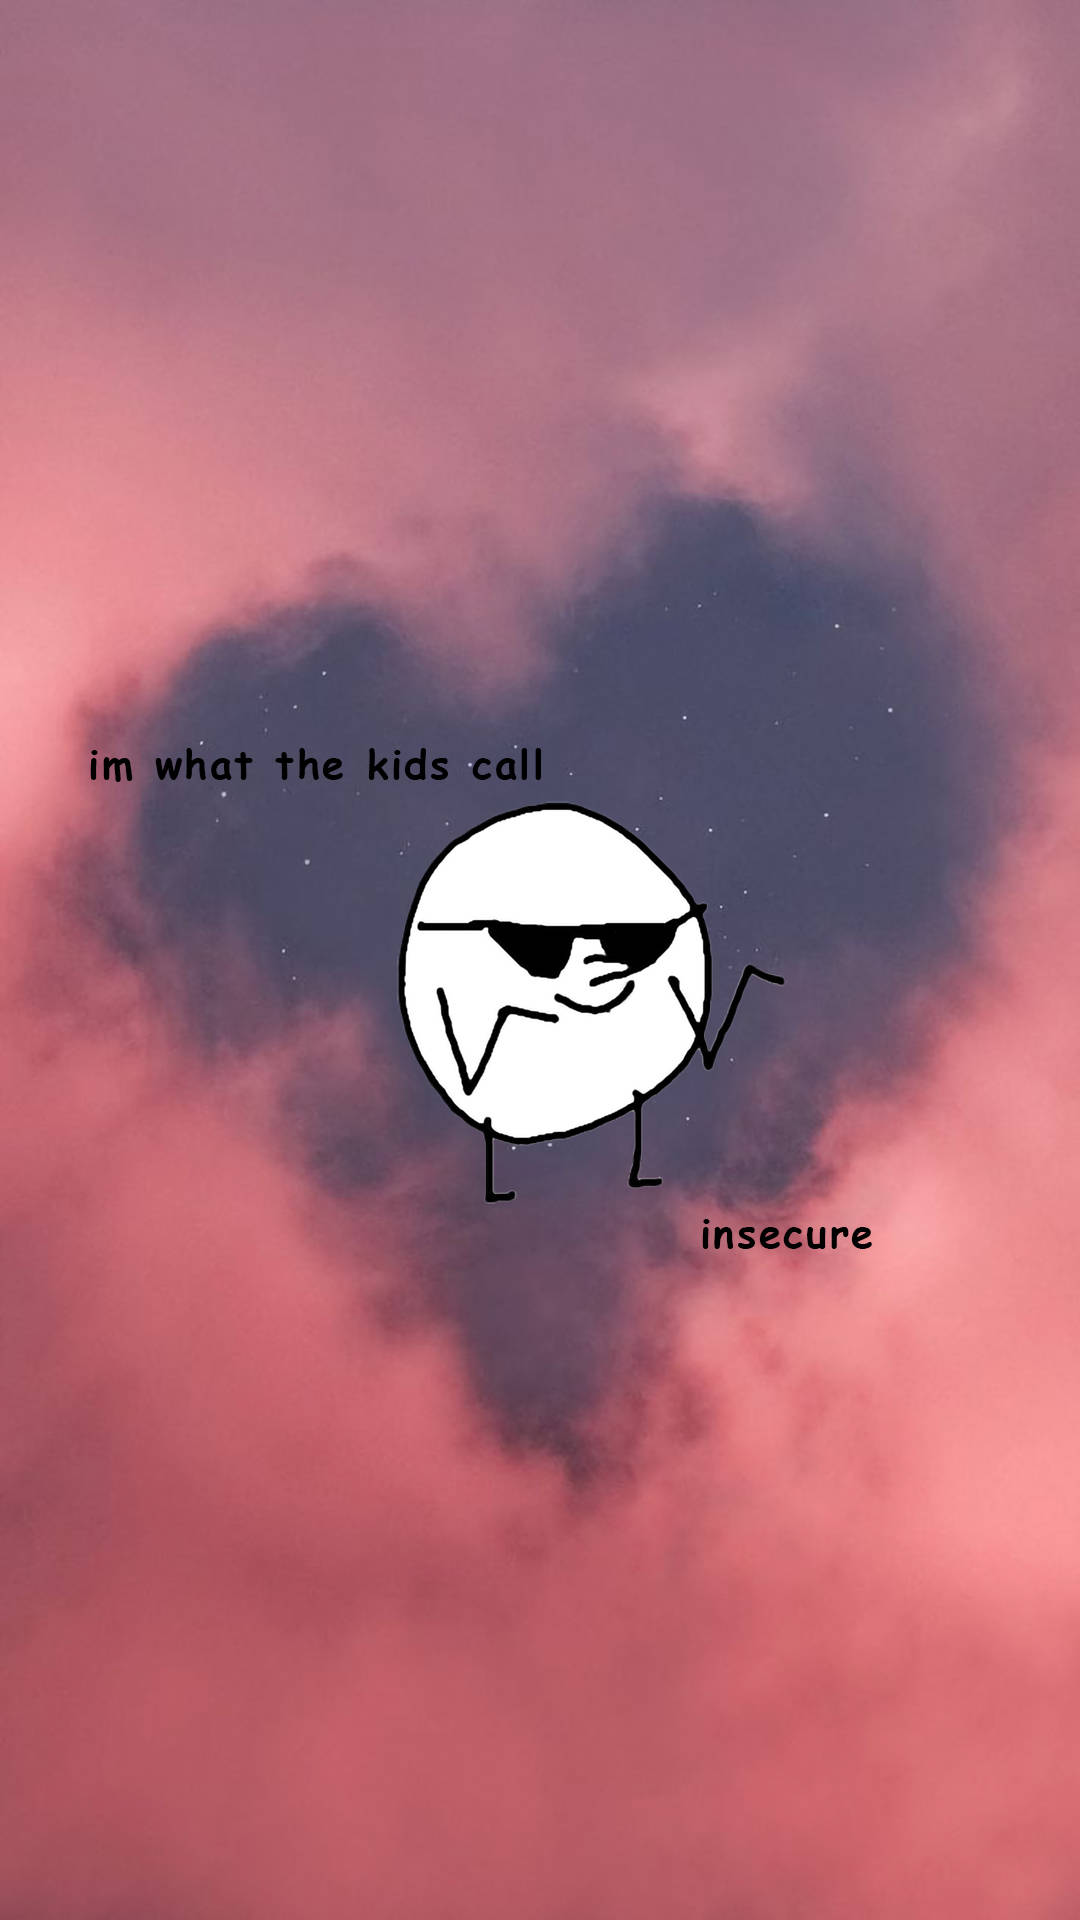 Funny Aesthetic Insecure Egg Wallpaper